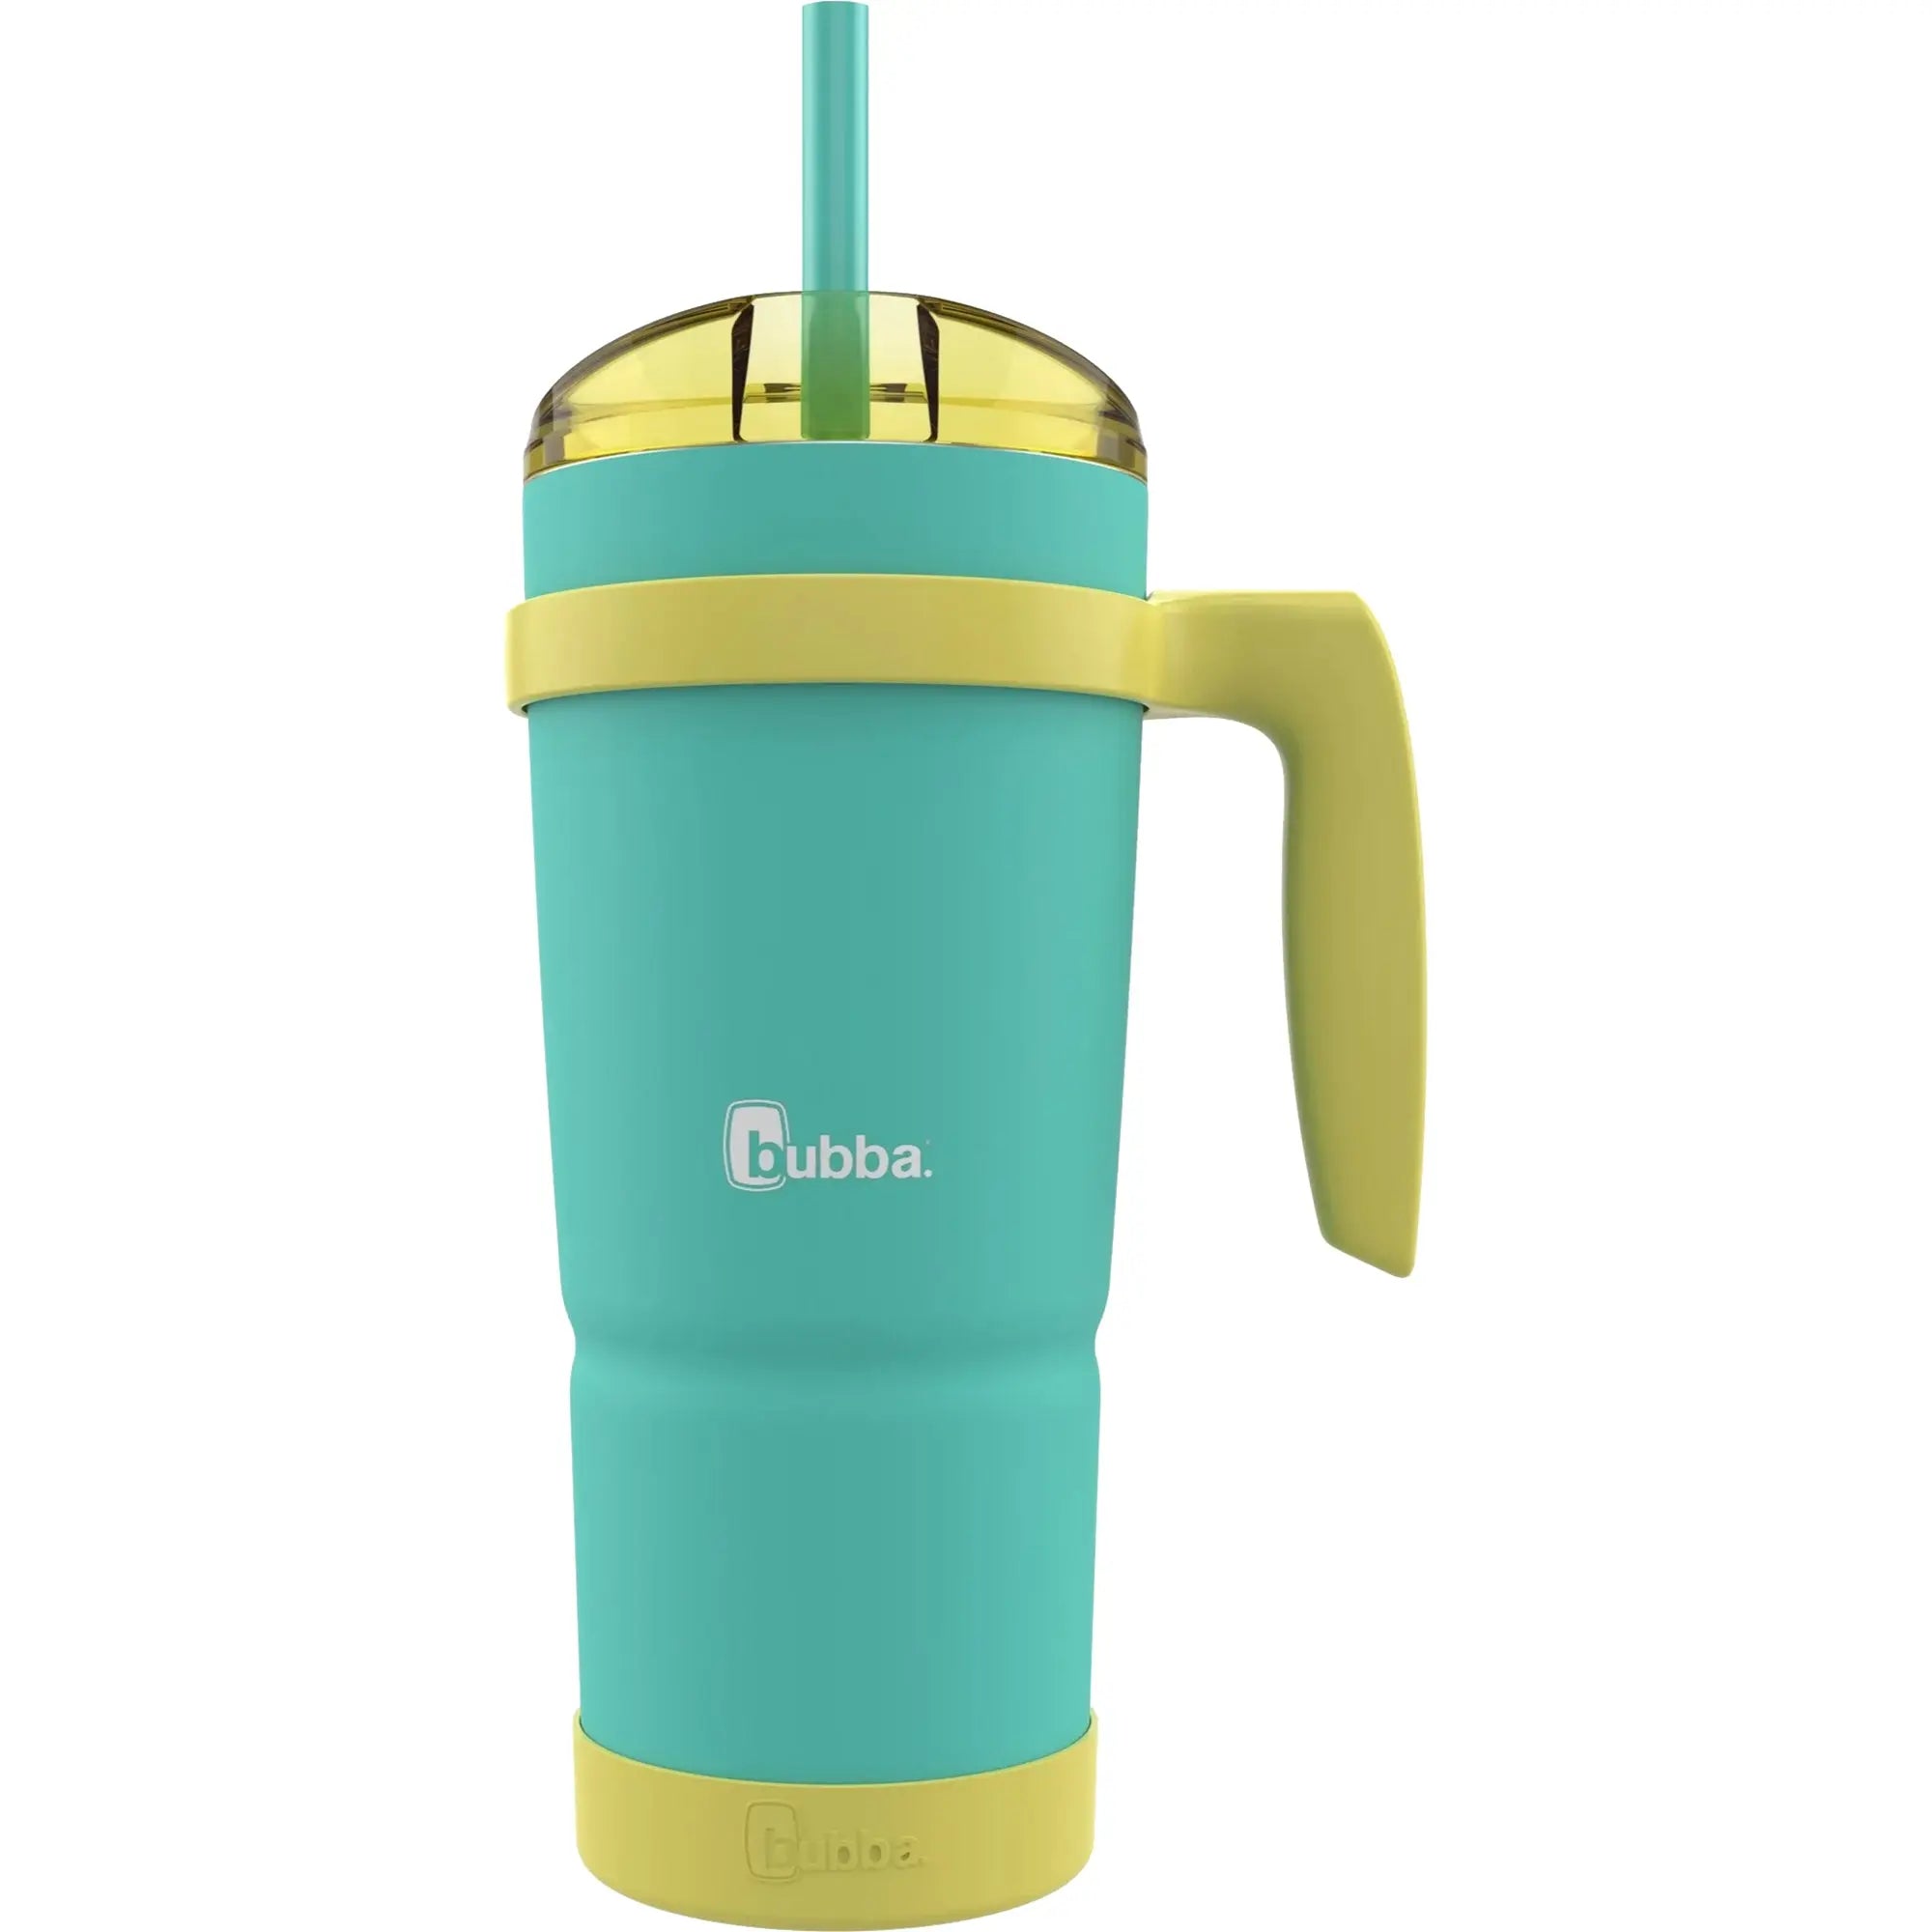 Bubba 32 oz. Envy Vacuum Insulated Stainless Steel Rubberized Tumbler Bubba